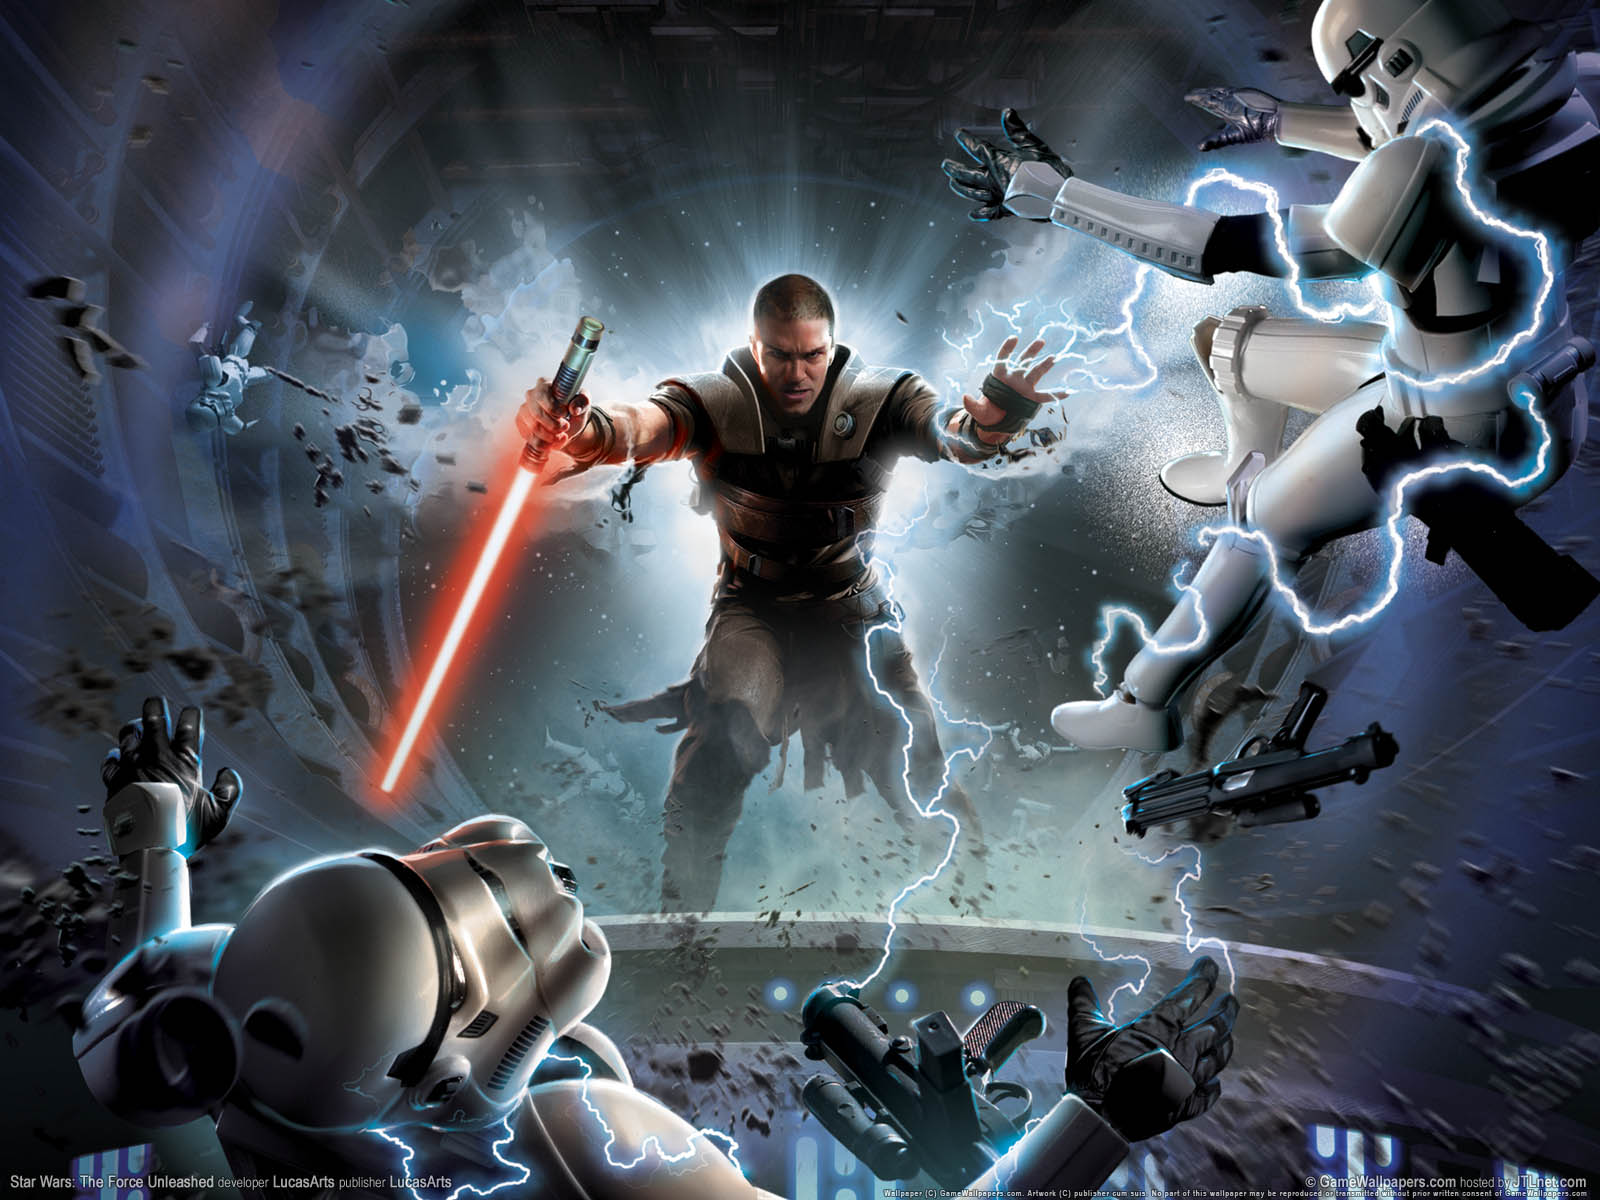 Star Wars%3A The Force Unleashed wallpaper 03 1600x1200